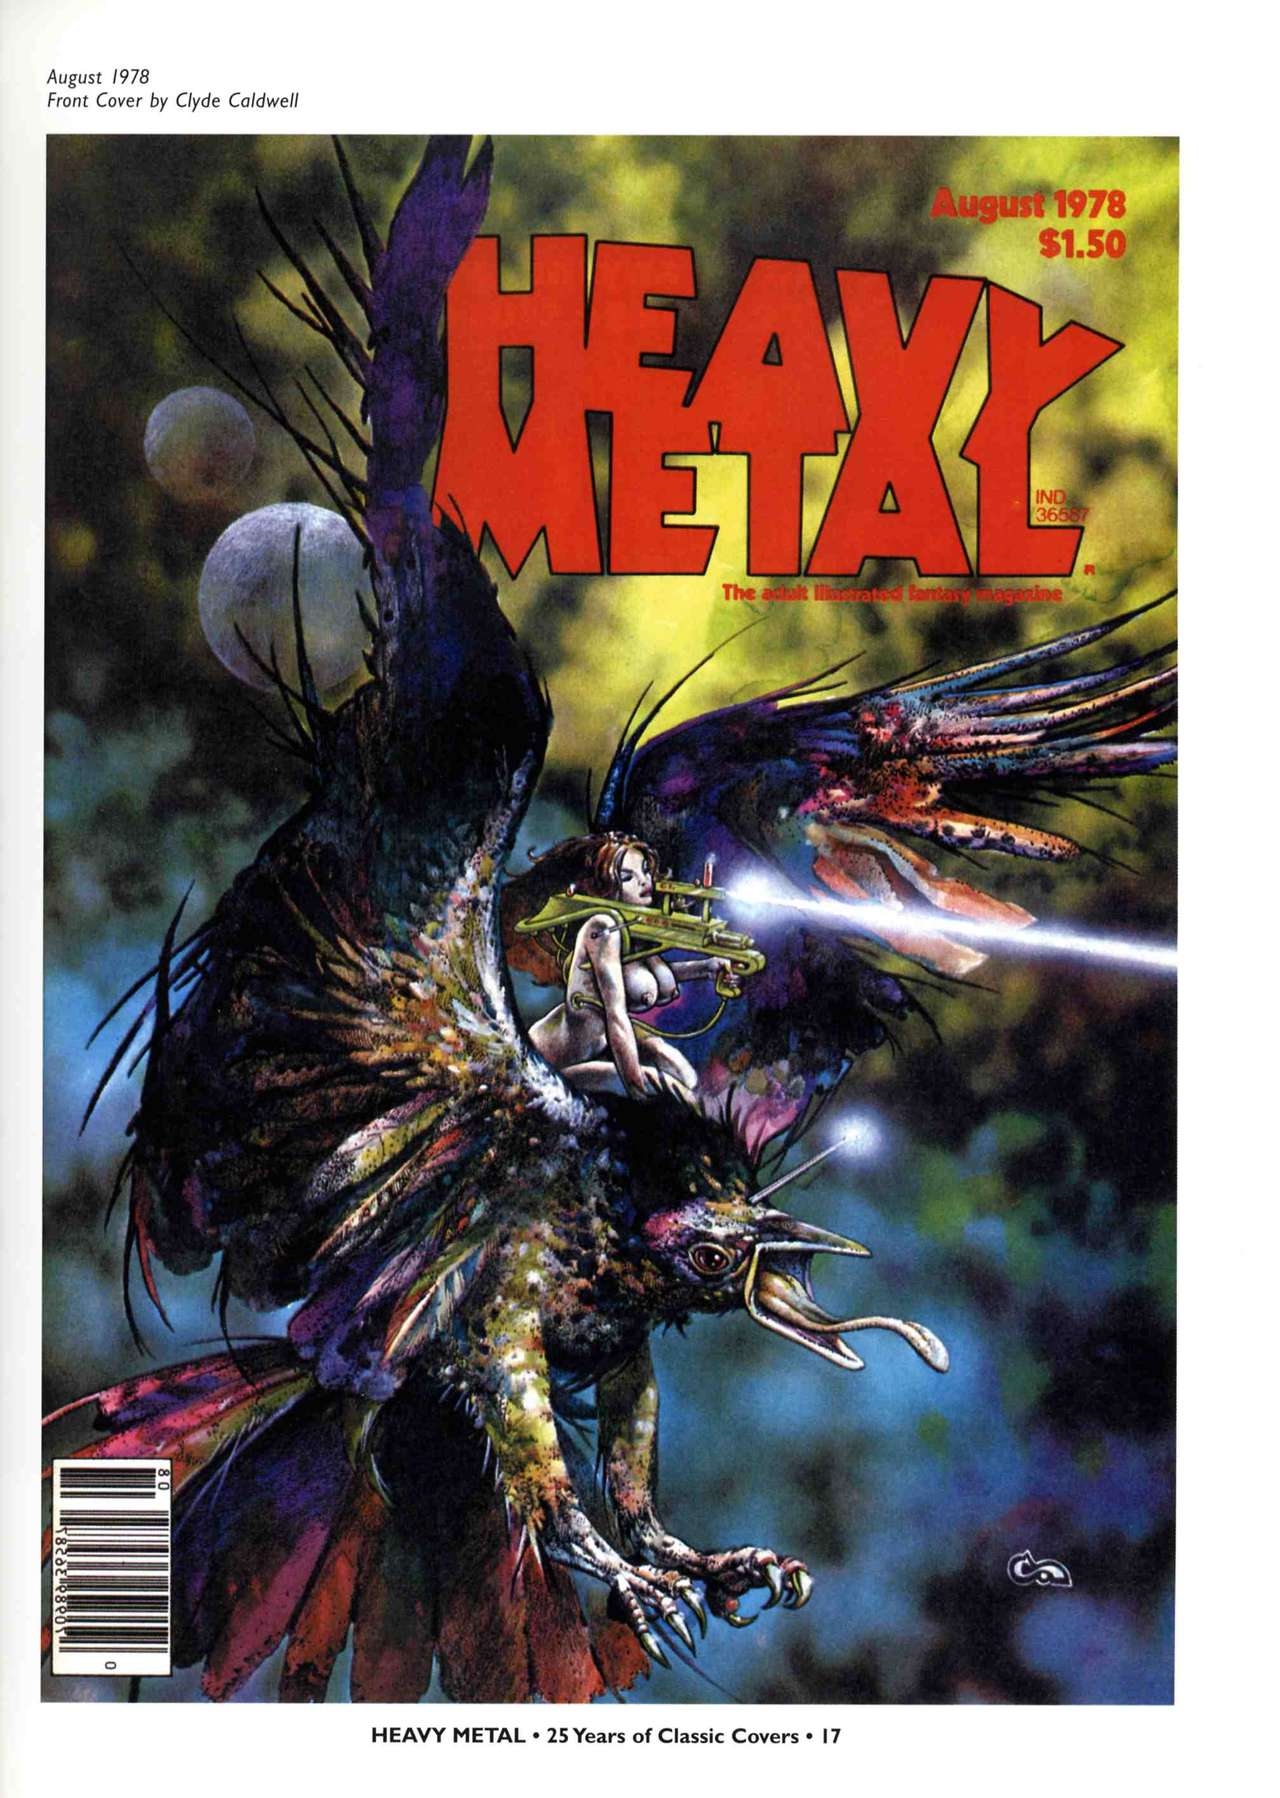 HEAVY METAL 25 Years of Classic Covers 22